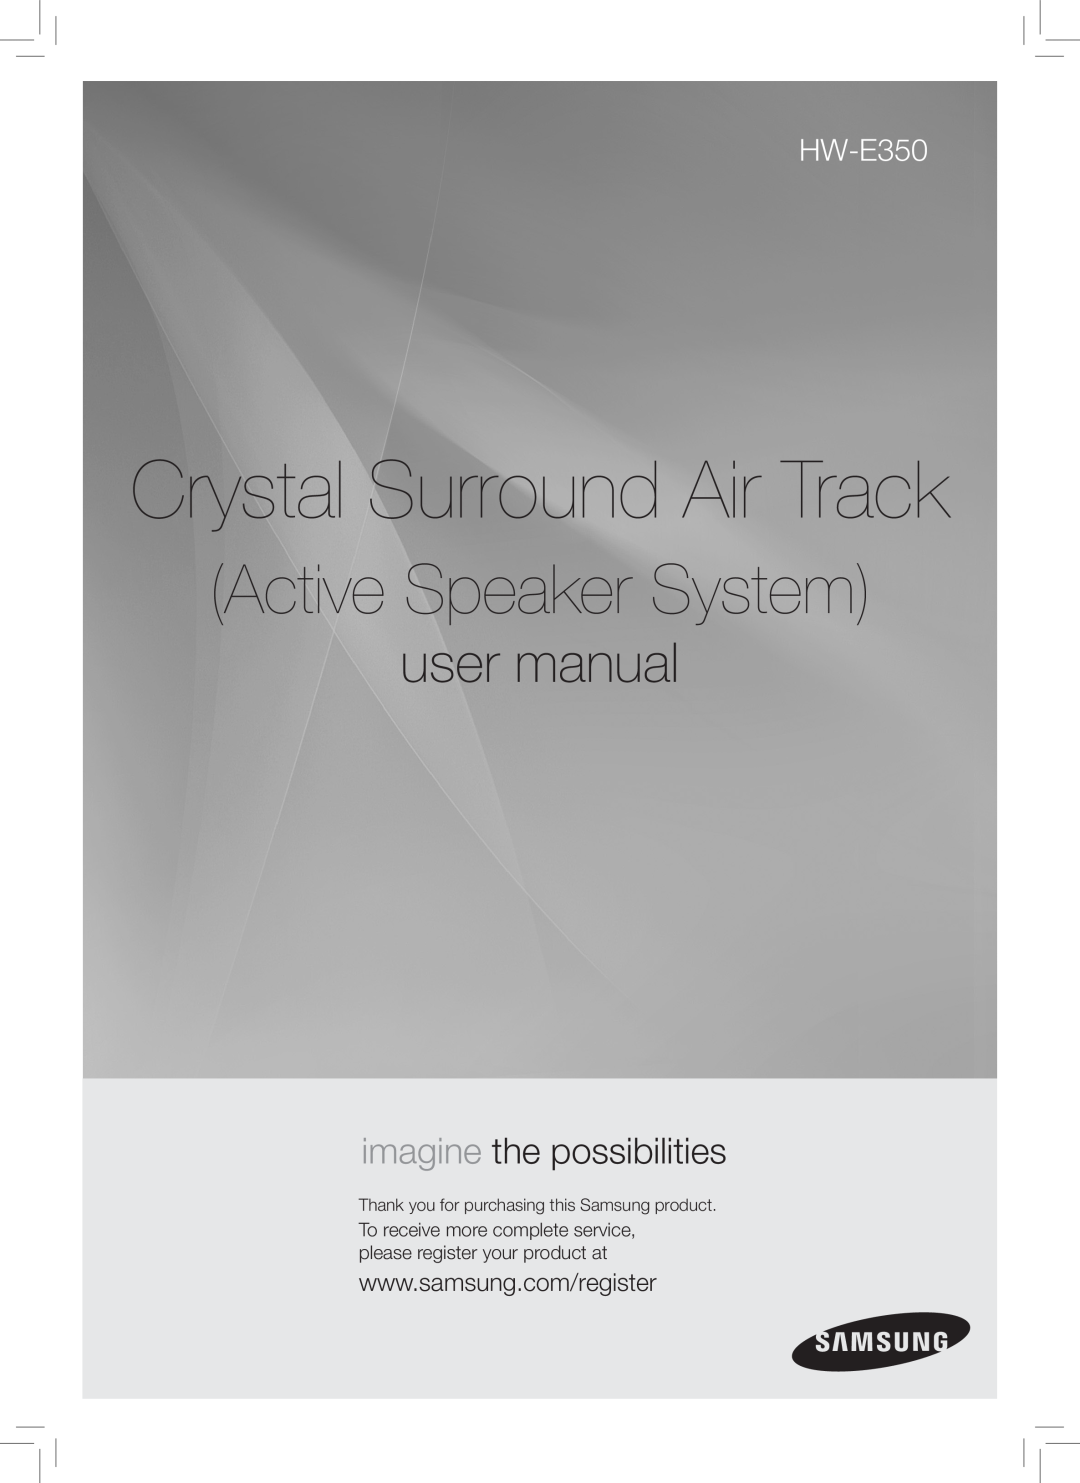 Samsung HW-E350 user manual Crystal Surround Air Track, Active Speaker System, imagine the possibilities 